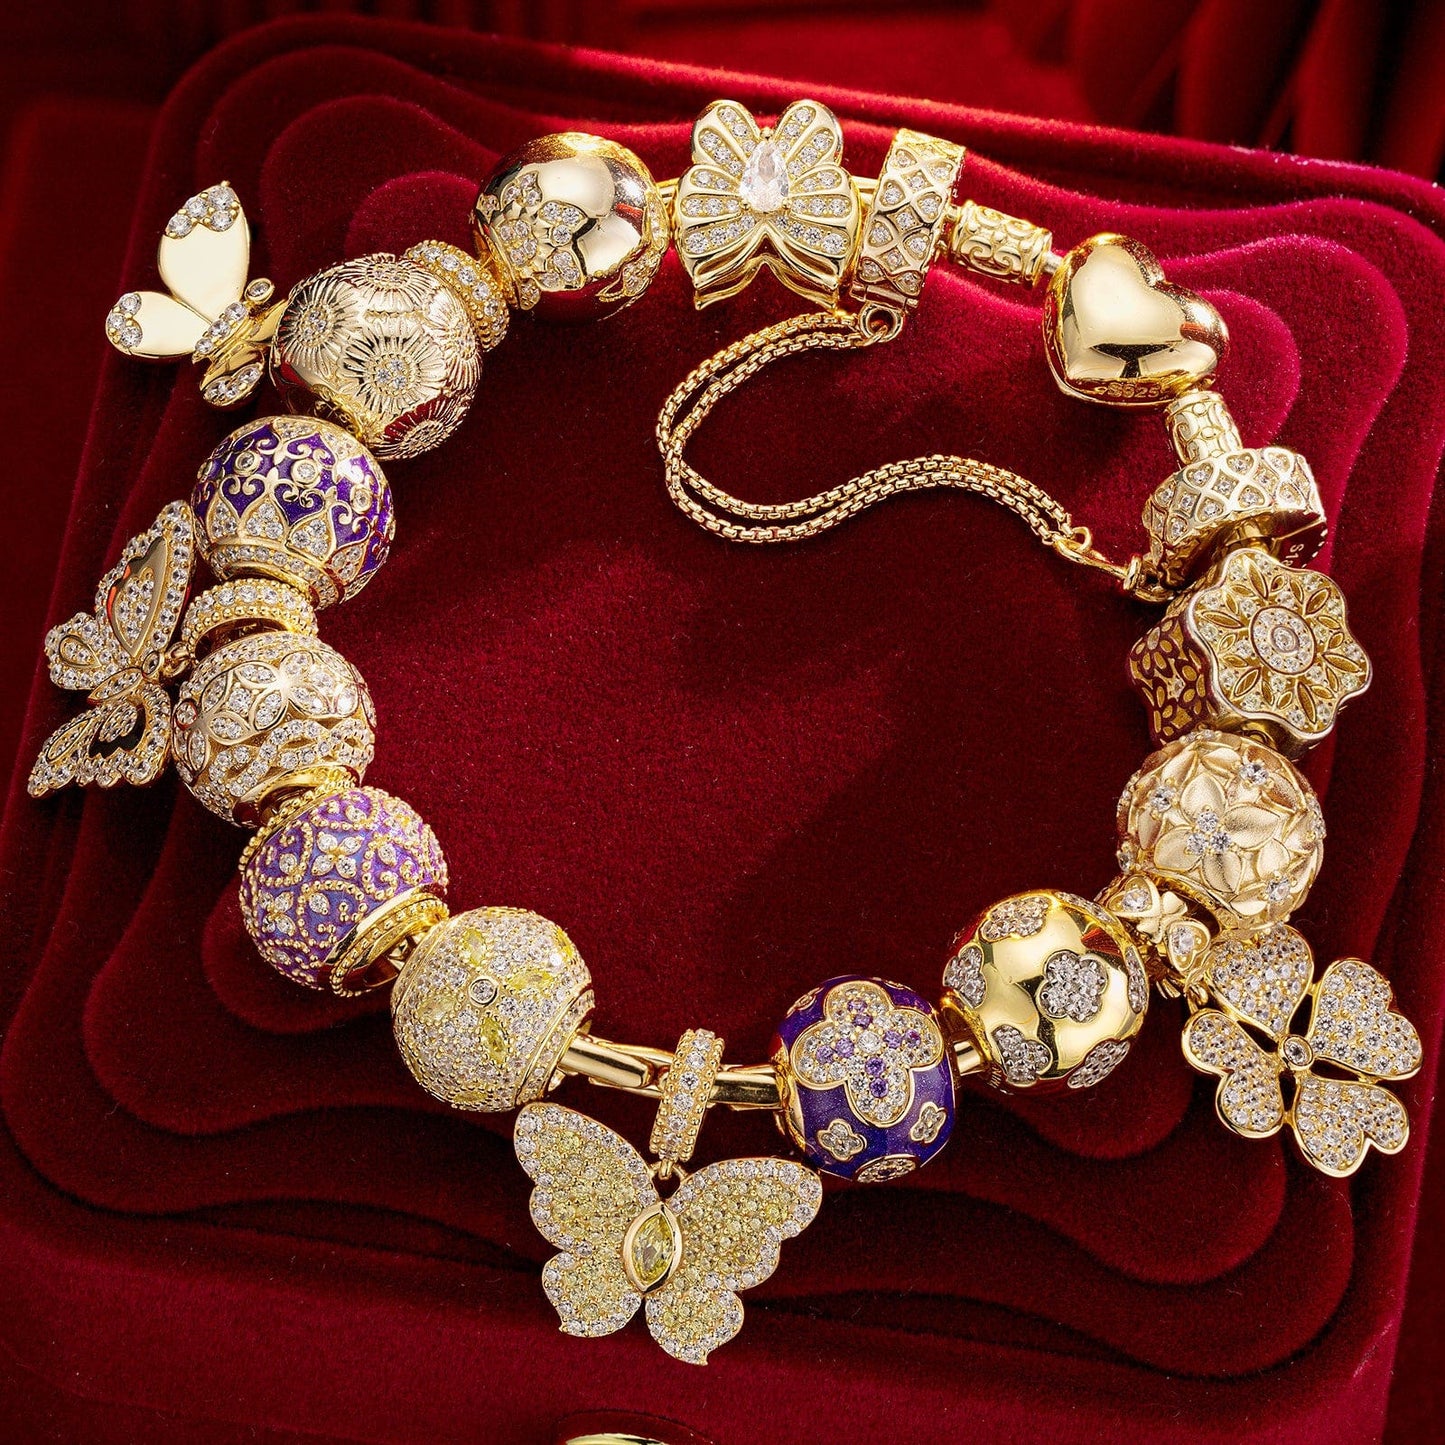 Shimmering Butterfly Sterling Silver Charms Bracelet Set With Enamel In 14K Gold Plated